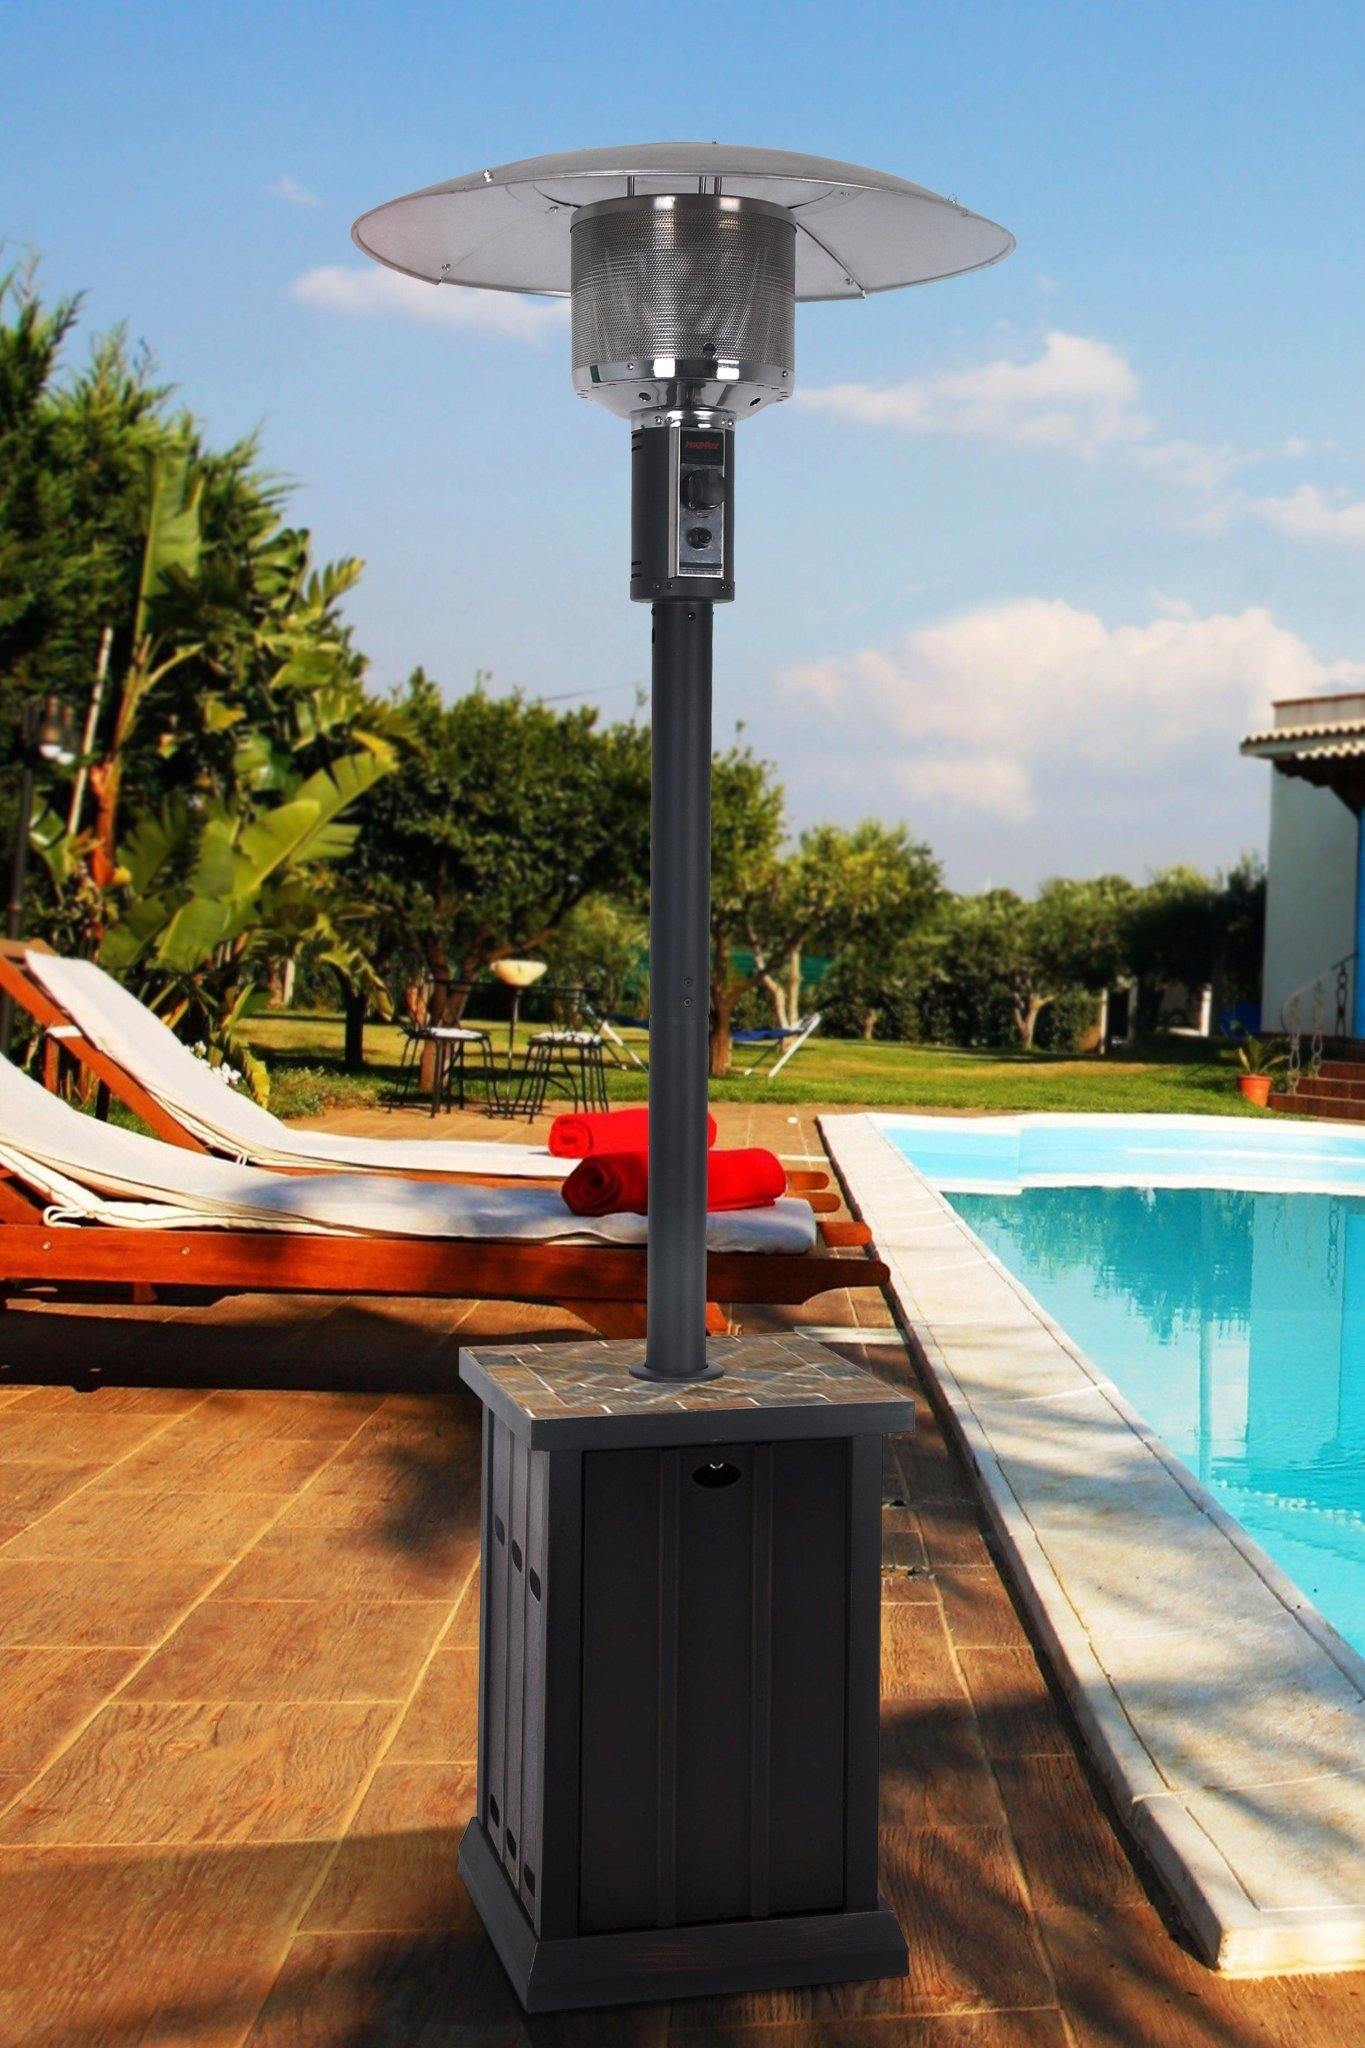 Patio Heater with Tile Tabletop - Dti Direct USA